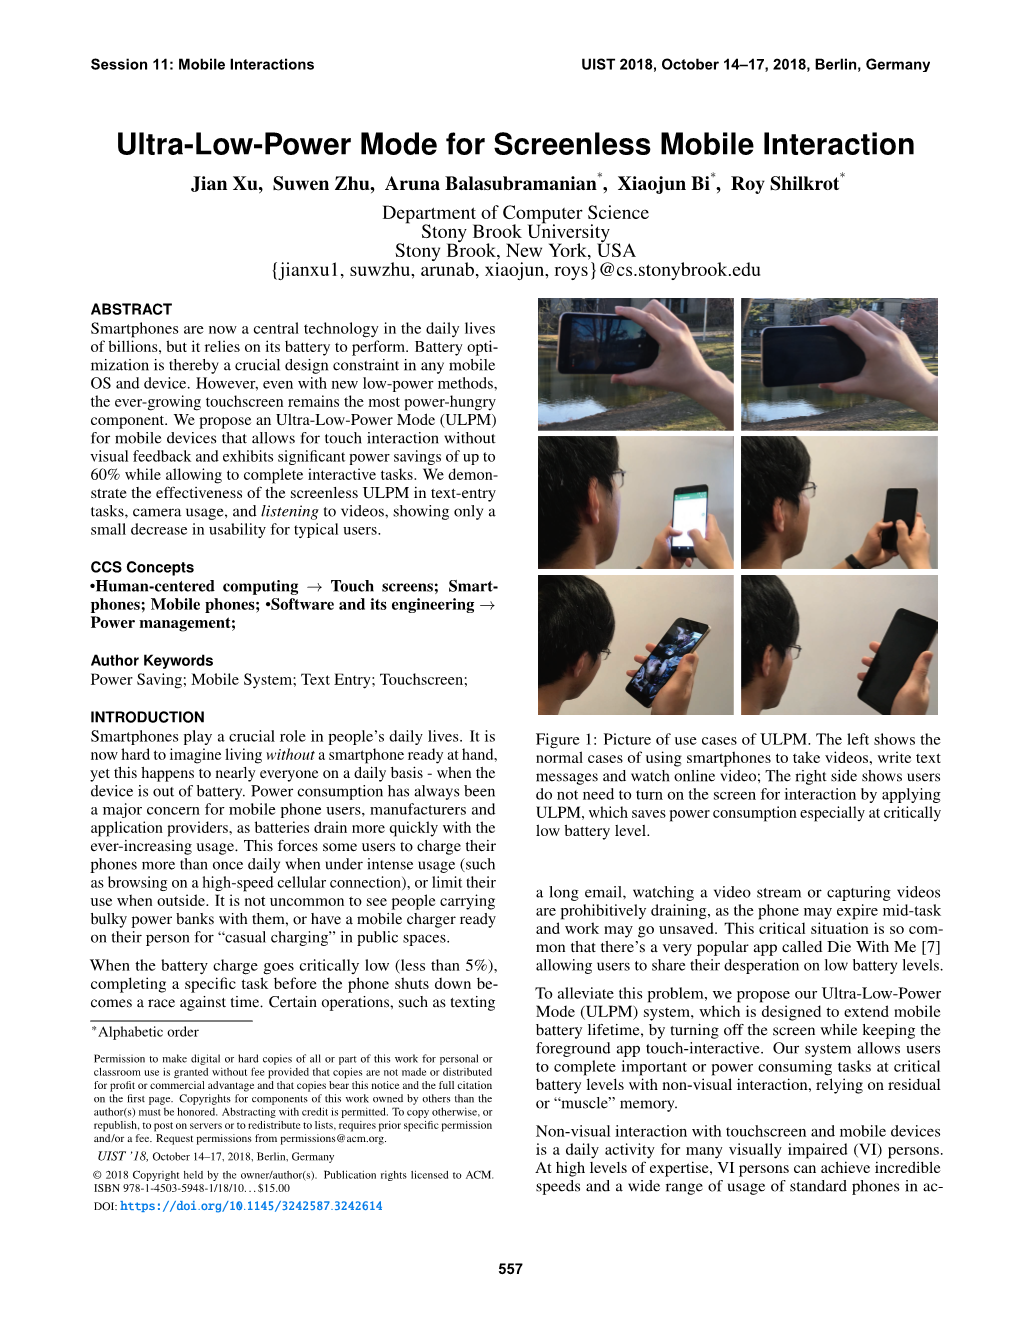 Ultra-Low-Power Mode for Screenless Mobile Interaction